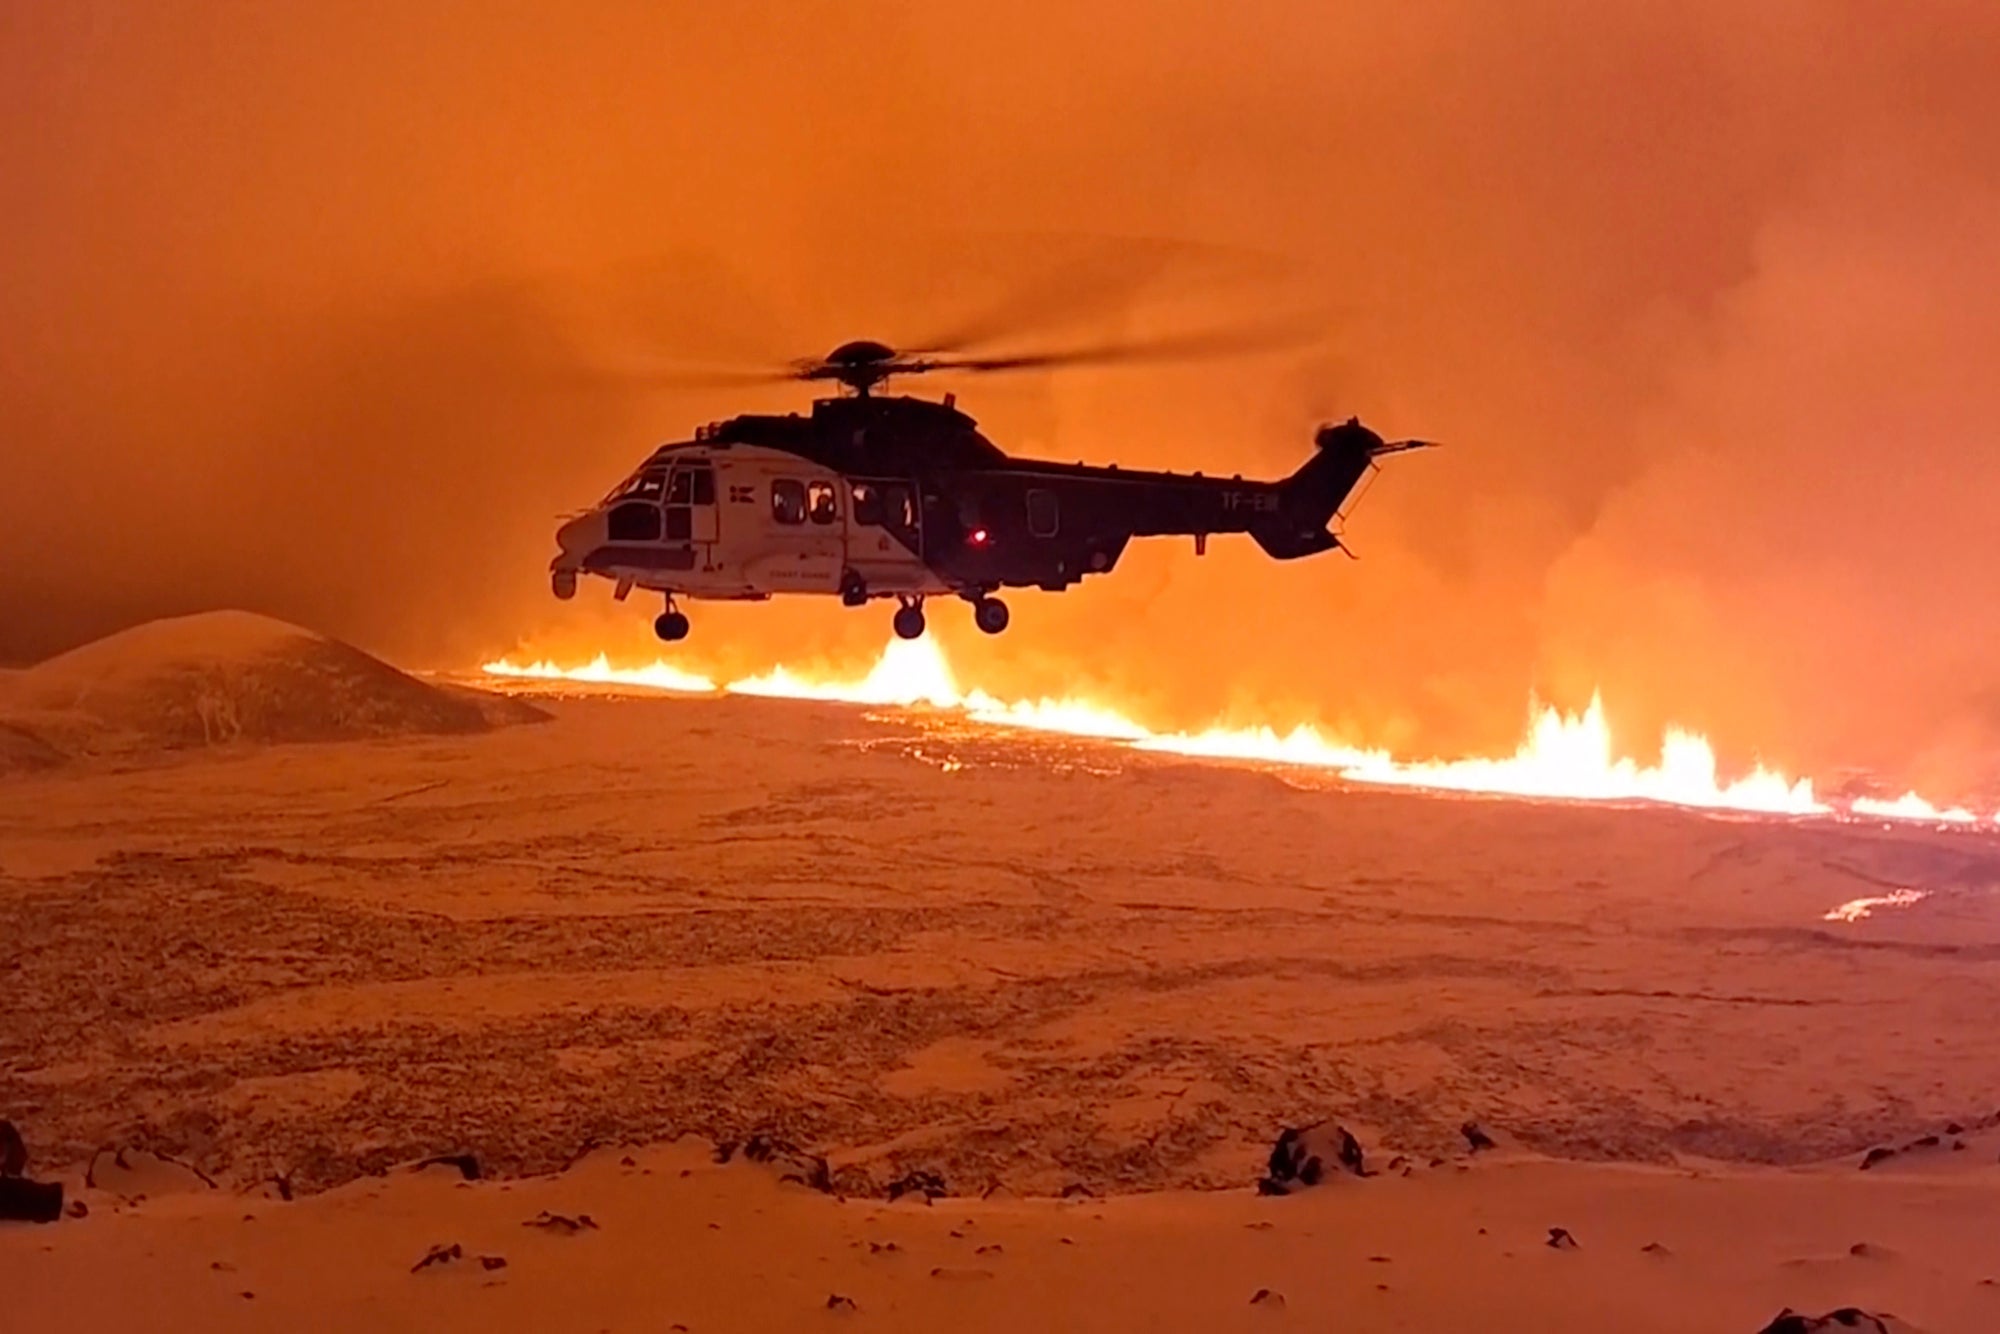 Scientists flew over the eruption in helicopters to observe the 100m high plumes of smoke and lava